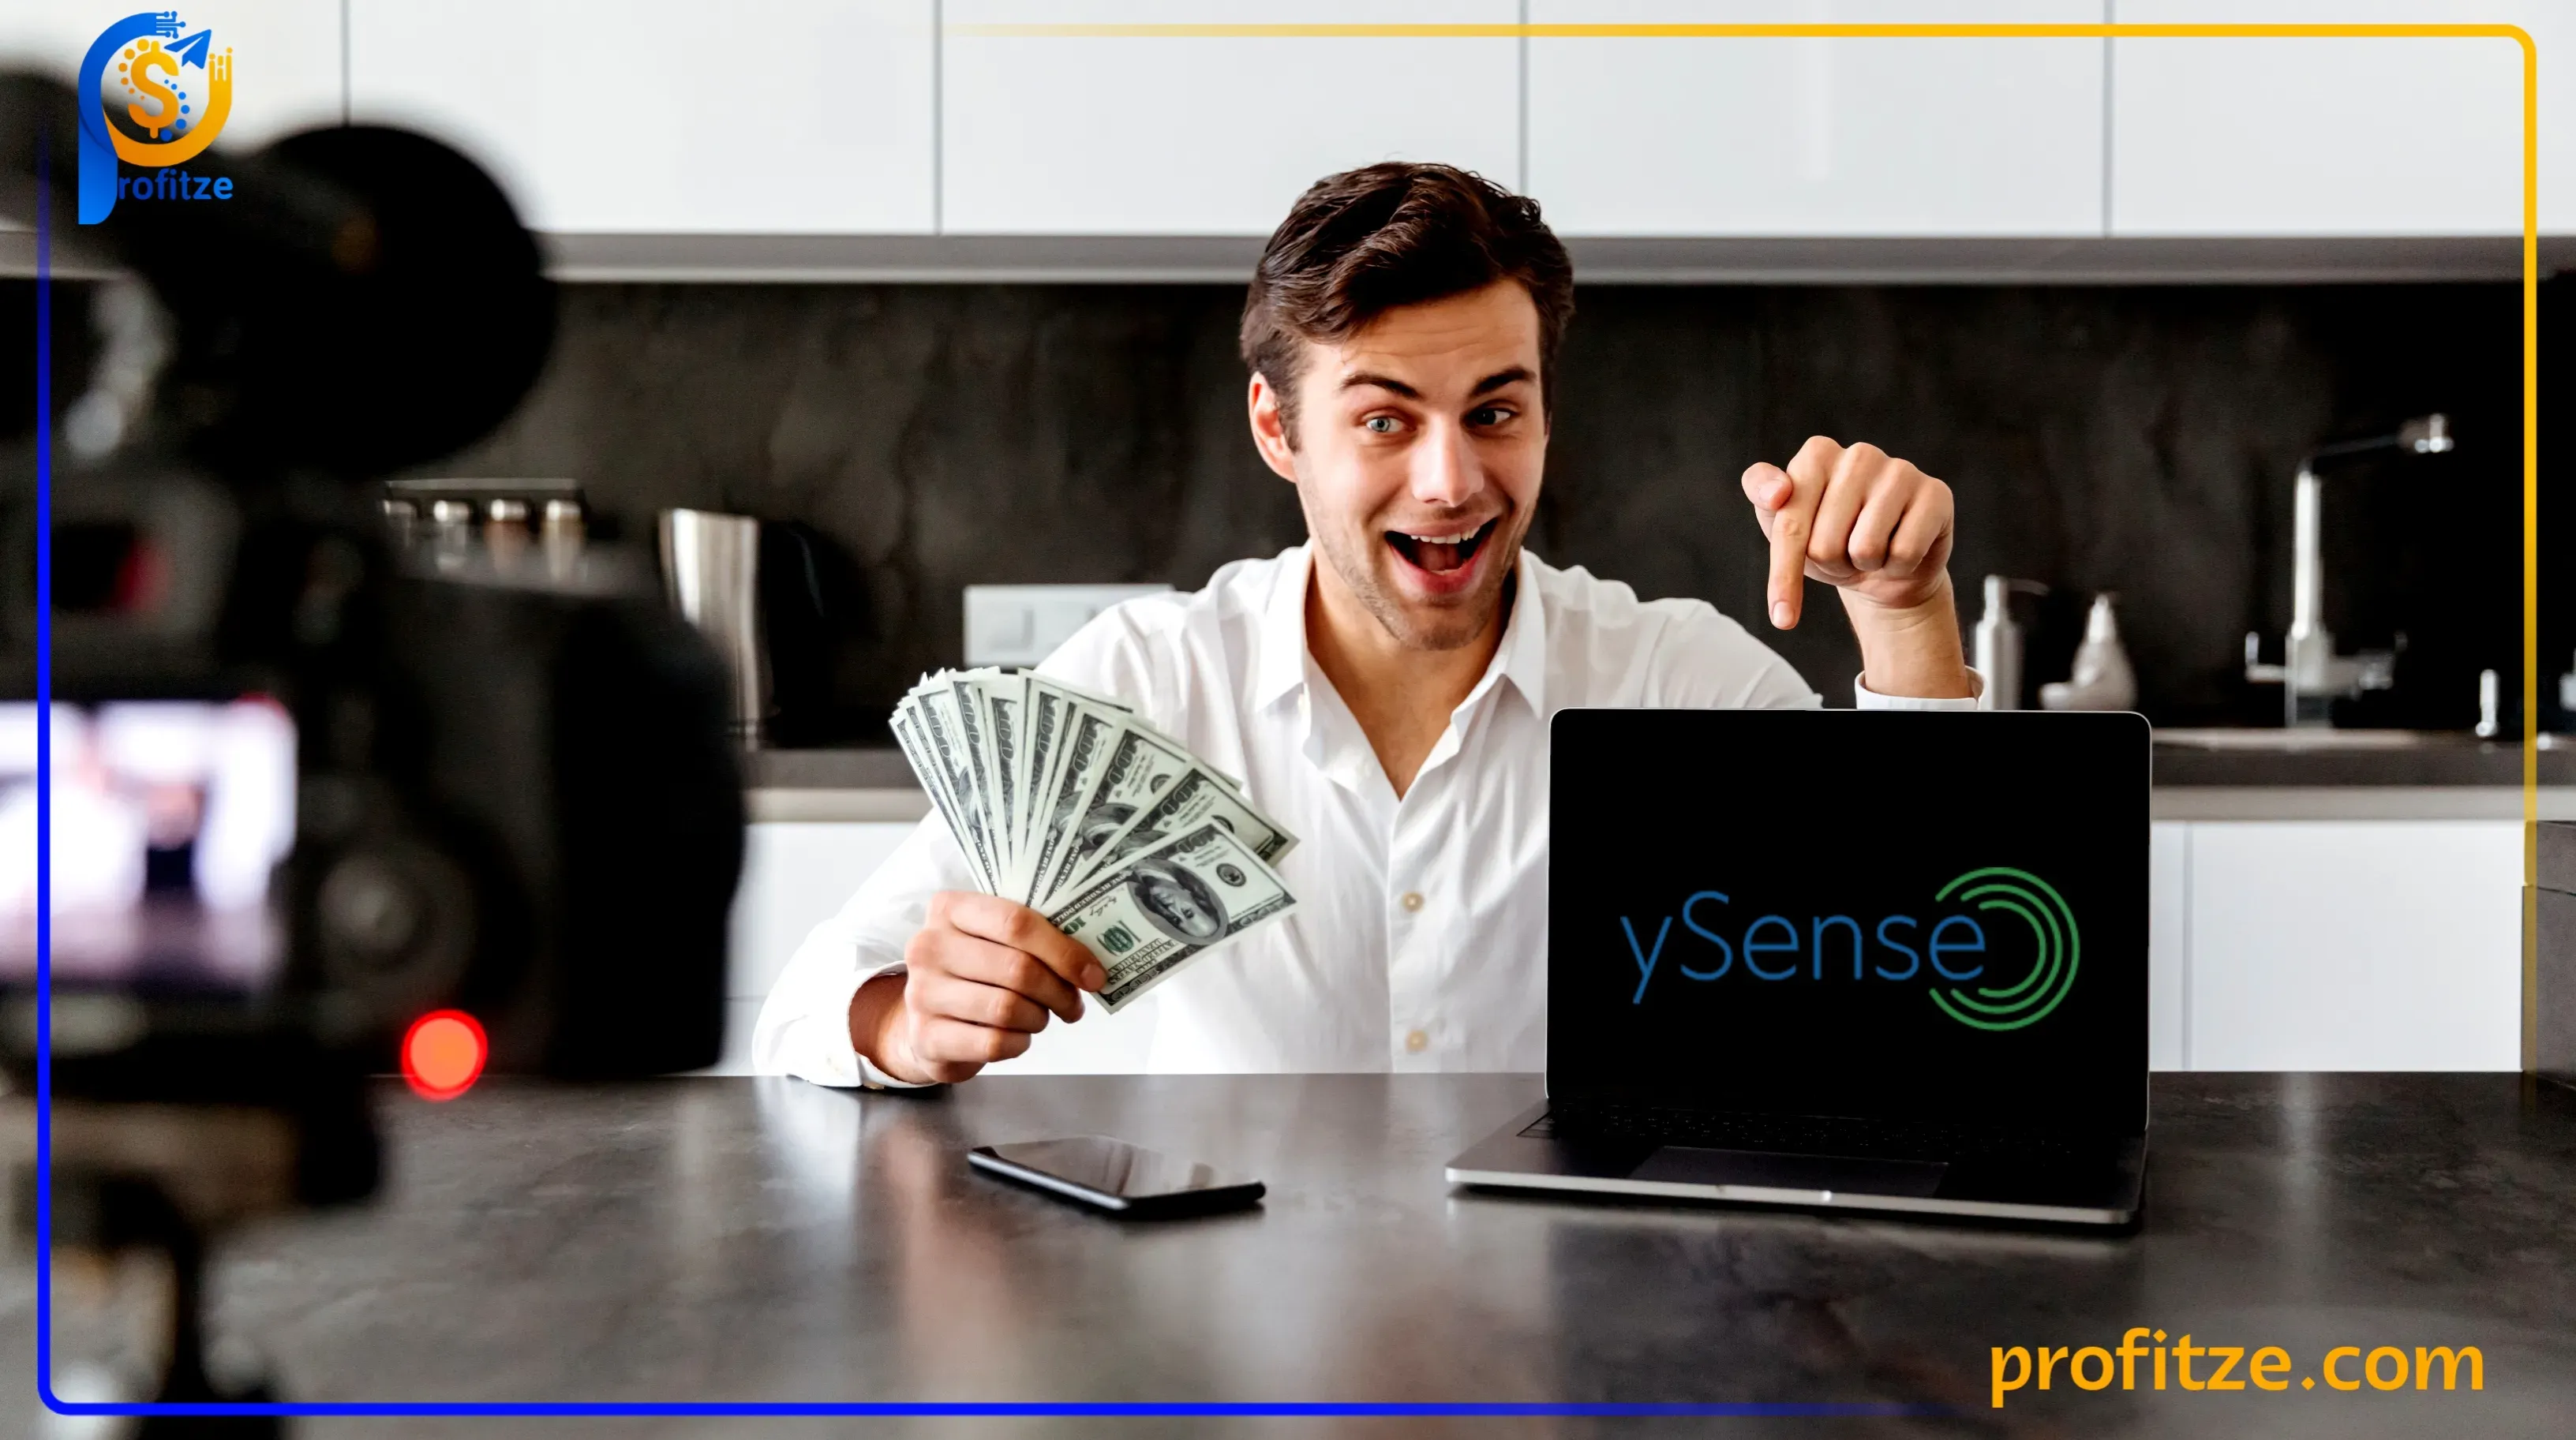 how to earn money from ysense